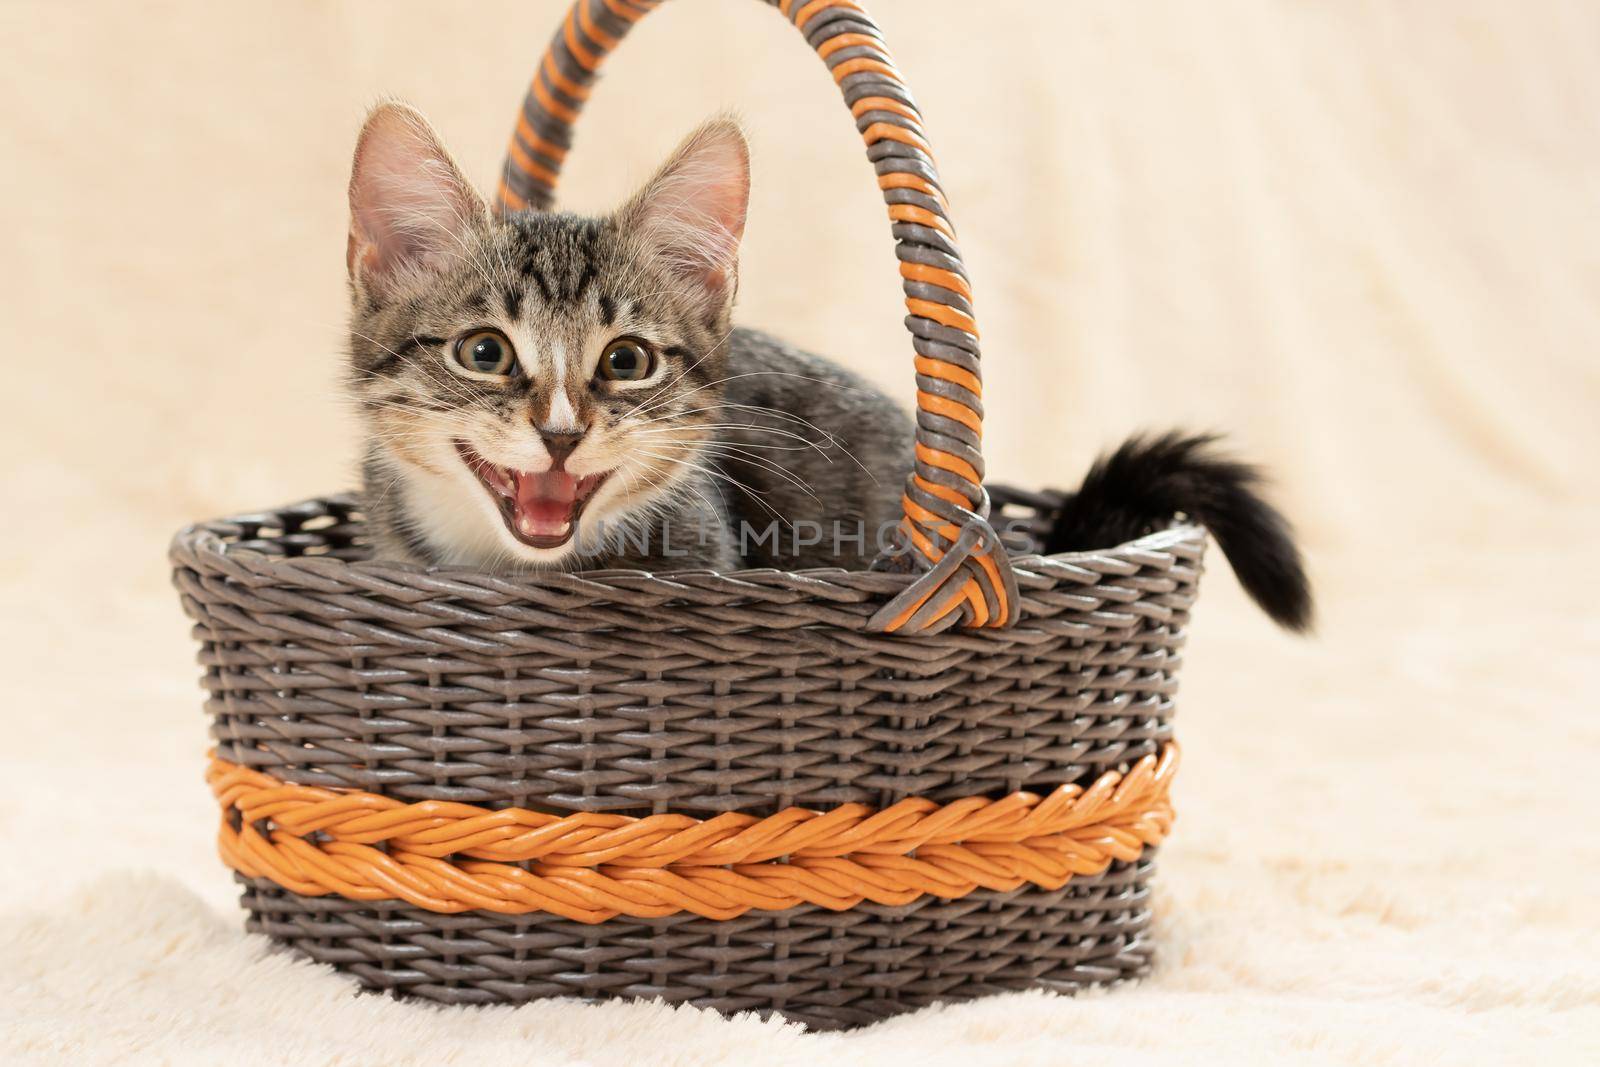 Cute gray kitten meows while sitting in a wicker basket on a background of a cream fur plaid by galsand